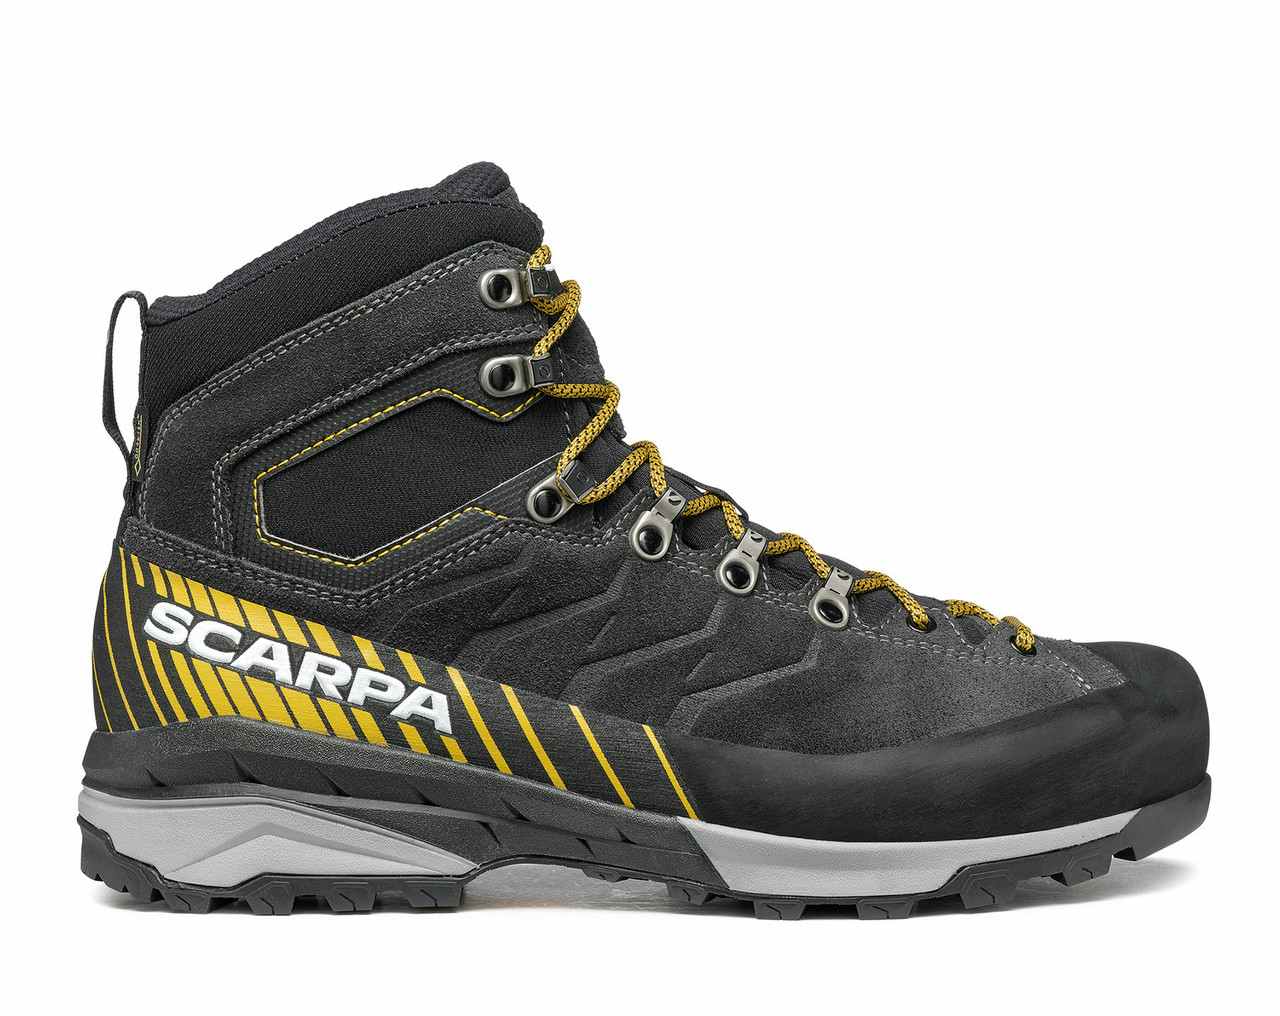 Mescalito Trk Gore-Tex Backpacking Boots Dark Anthracite/Mustard